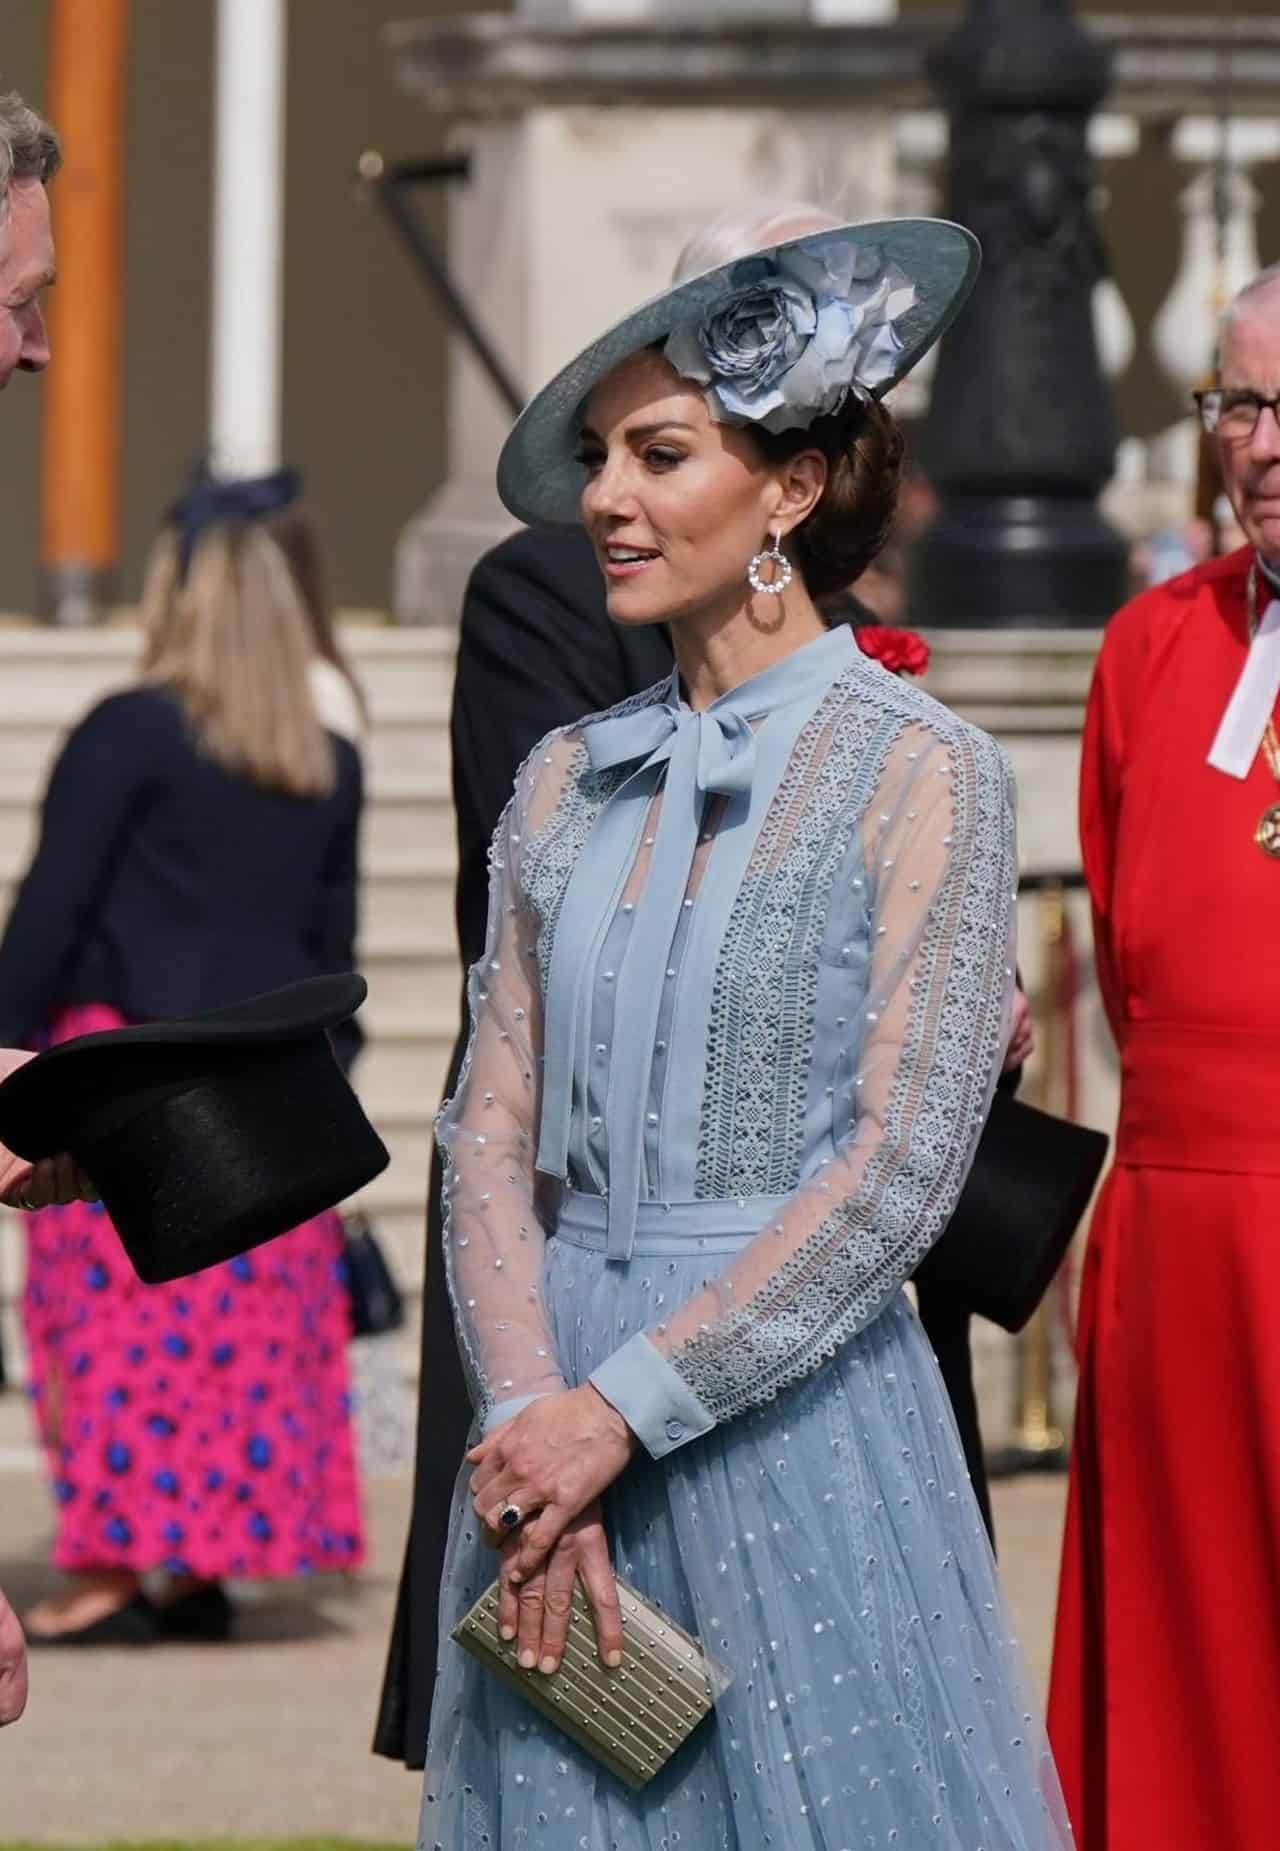 Kate Middleton in Elie Saab Dress at King Charles III’s Garden Party